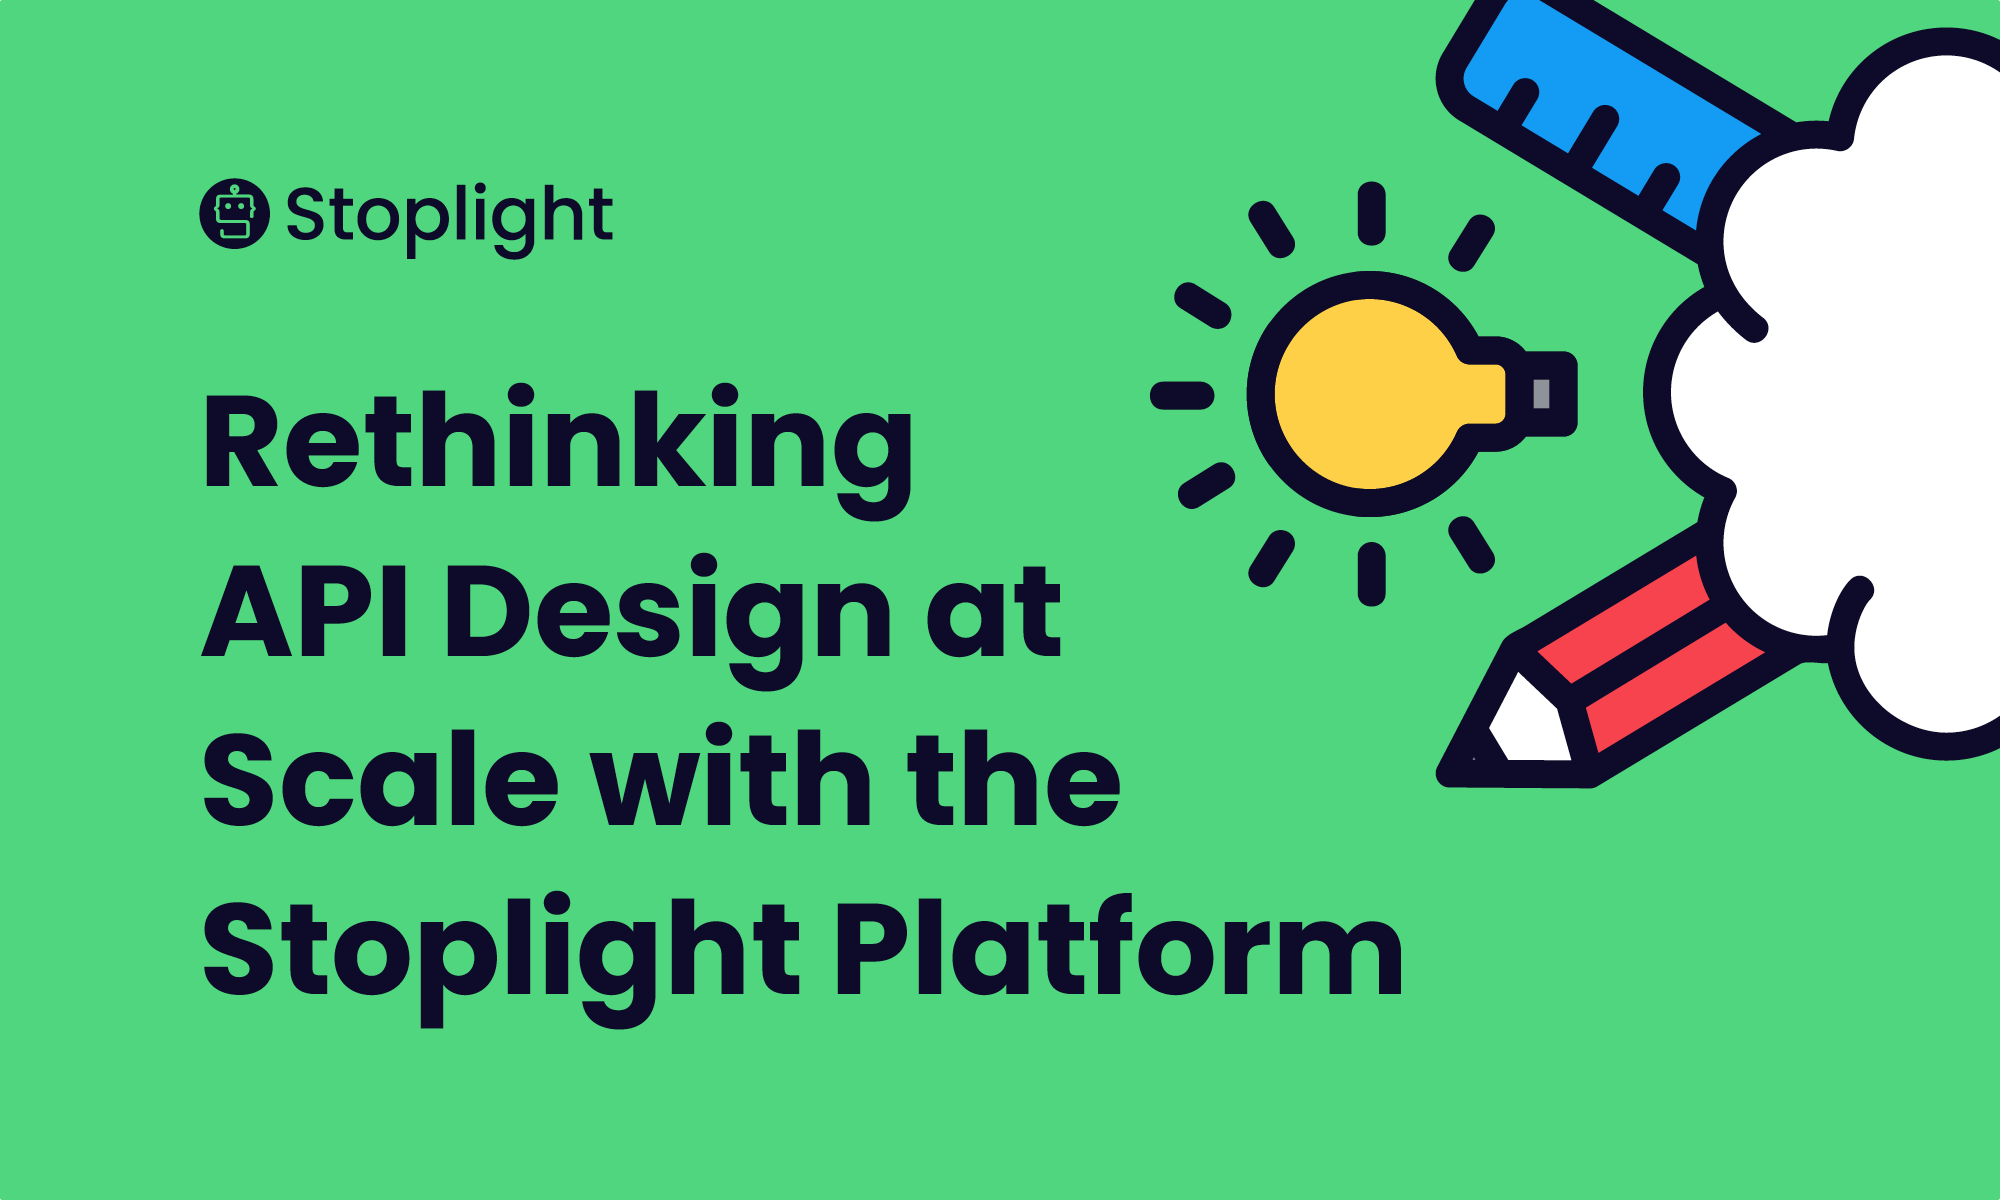 Rethinking API Design at Scale with the Stoplight Platform